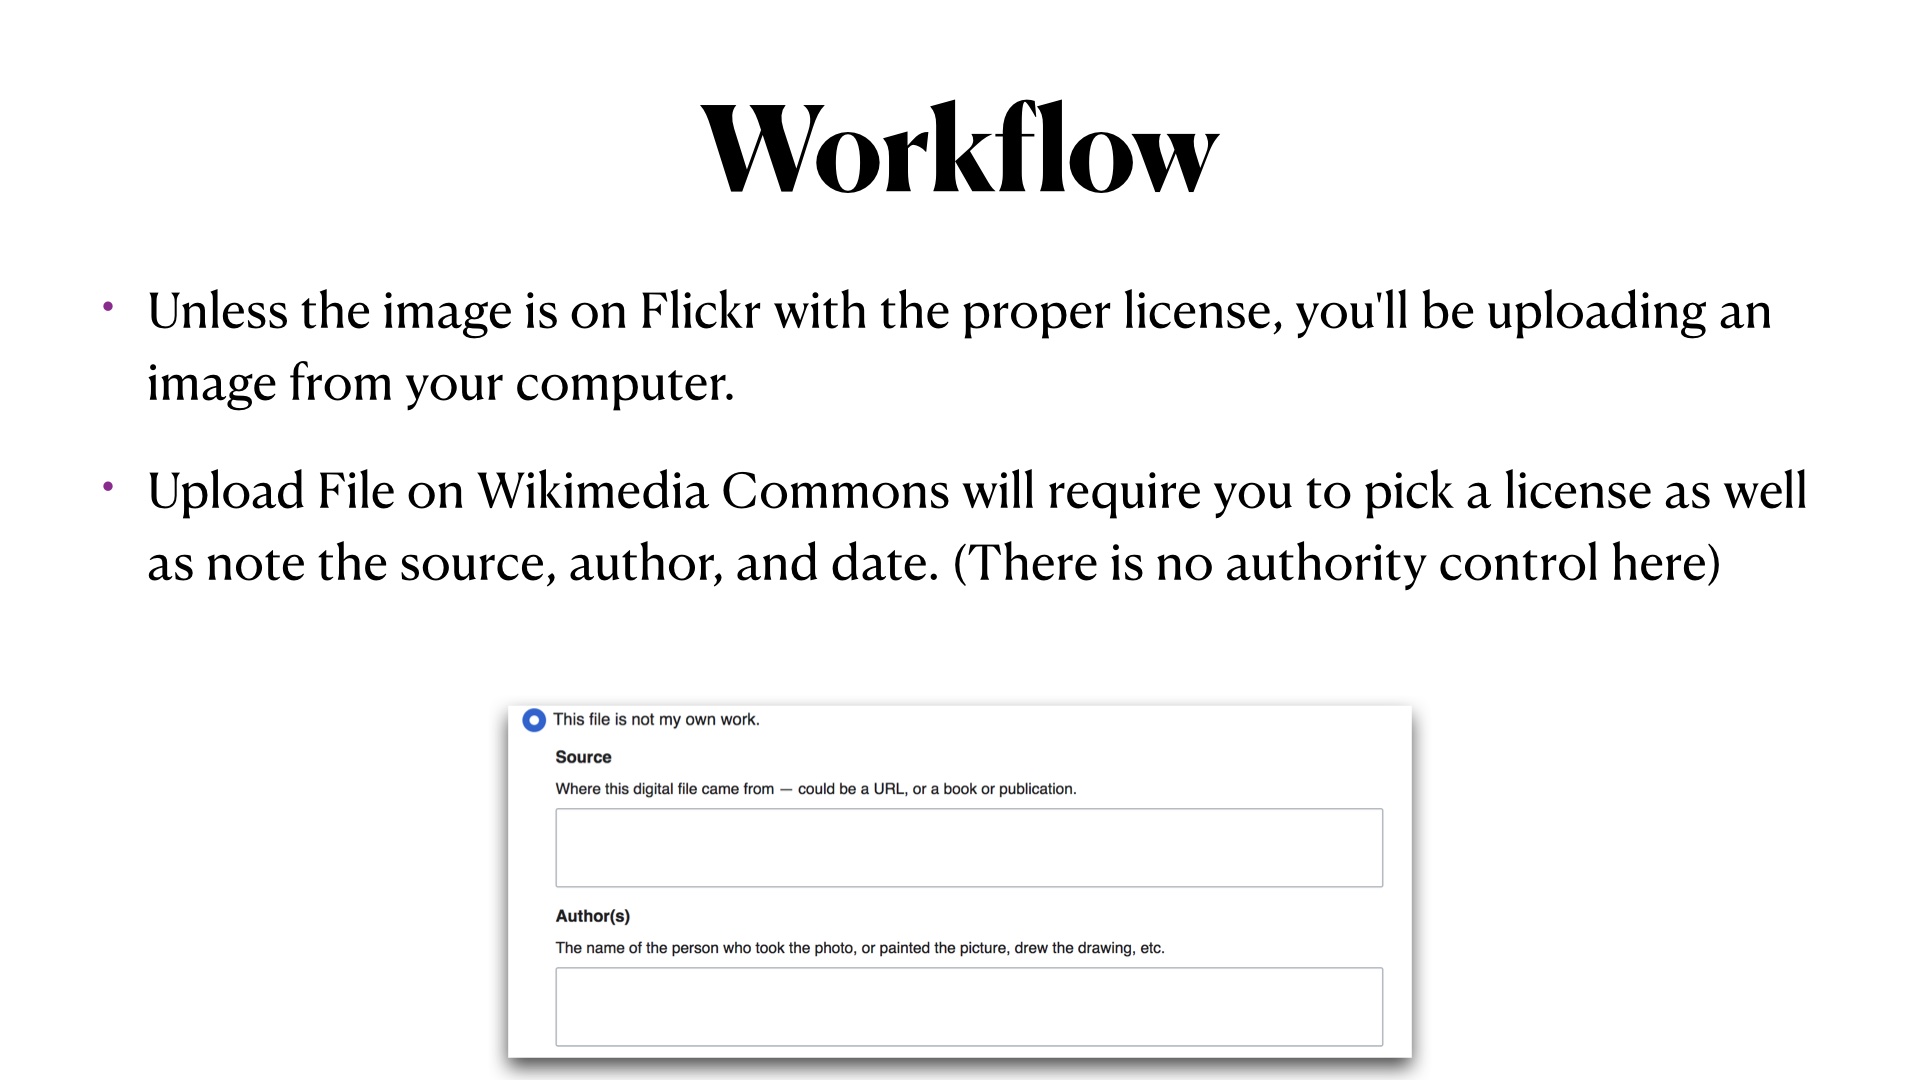 Workflow. Unless the image is on Flickr with the proper license, you'll be uploading an image from your computer.
Upload File on Wikimedia Commons will require you to pick a license as well as note the source, author, and date. (There is no authority control here). Screenshot of the boxes you have to fill in claiming where the image came from.